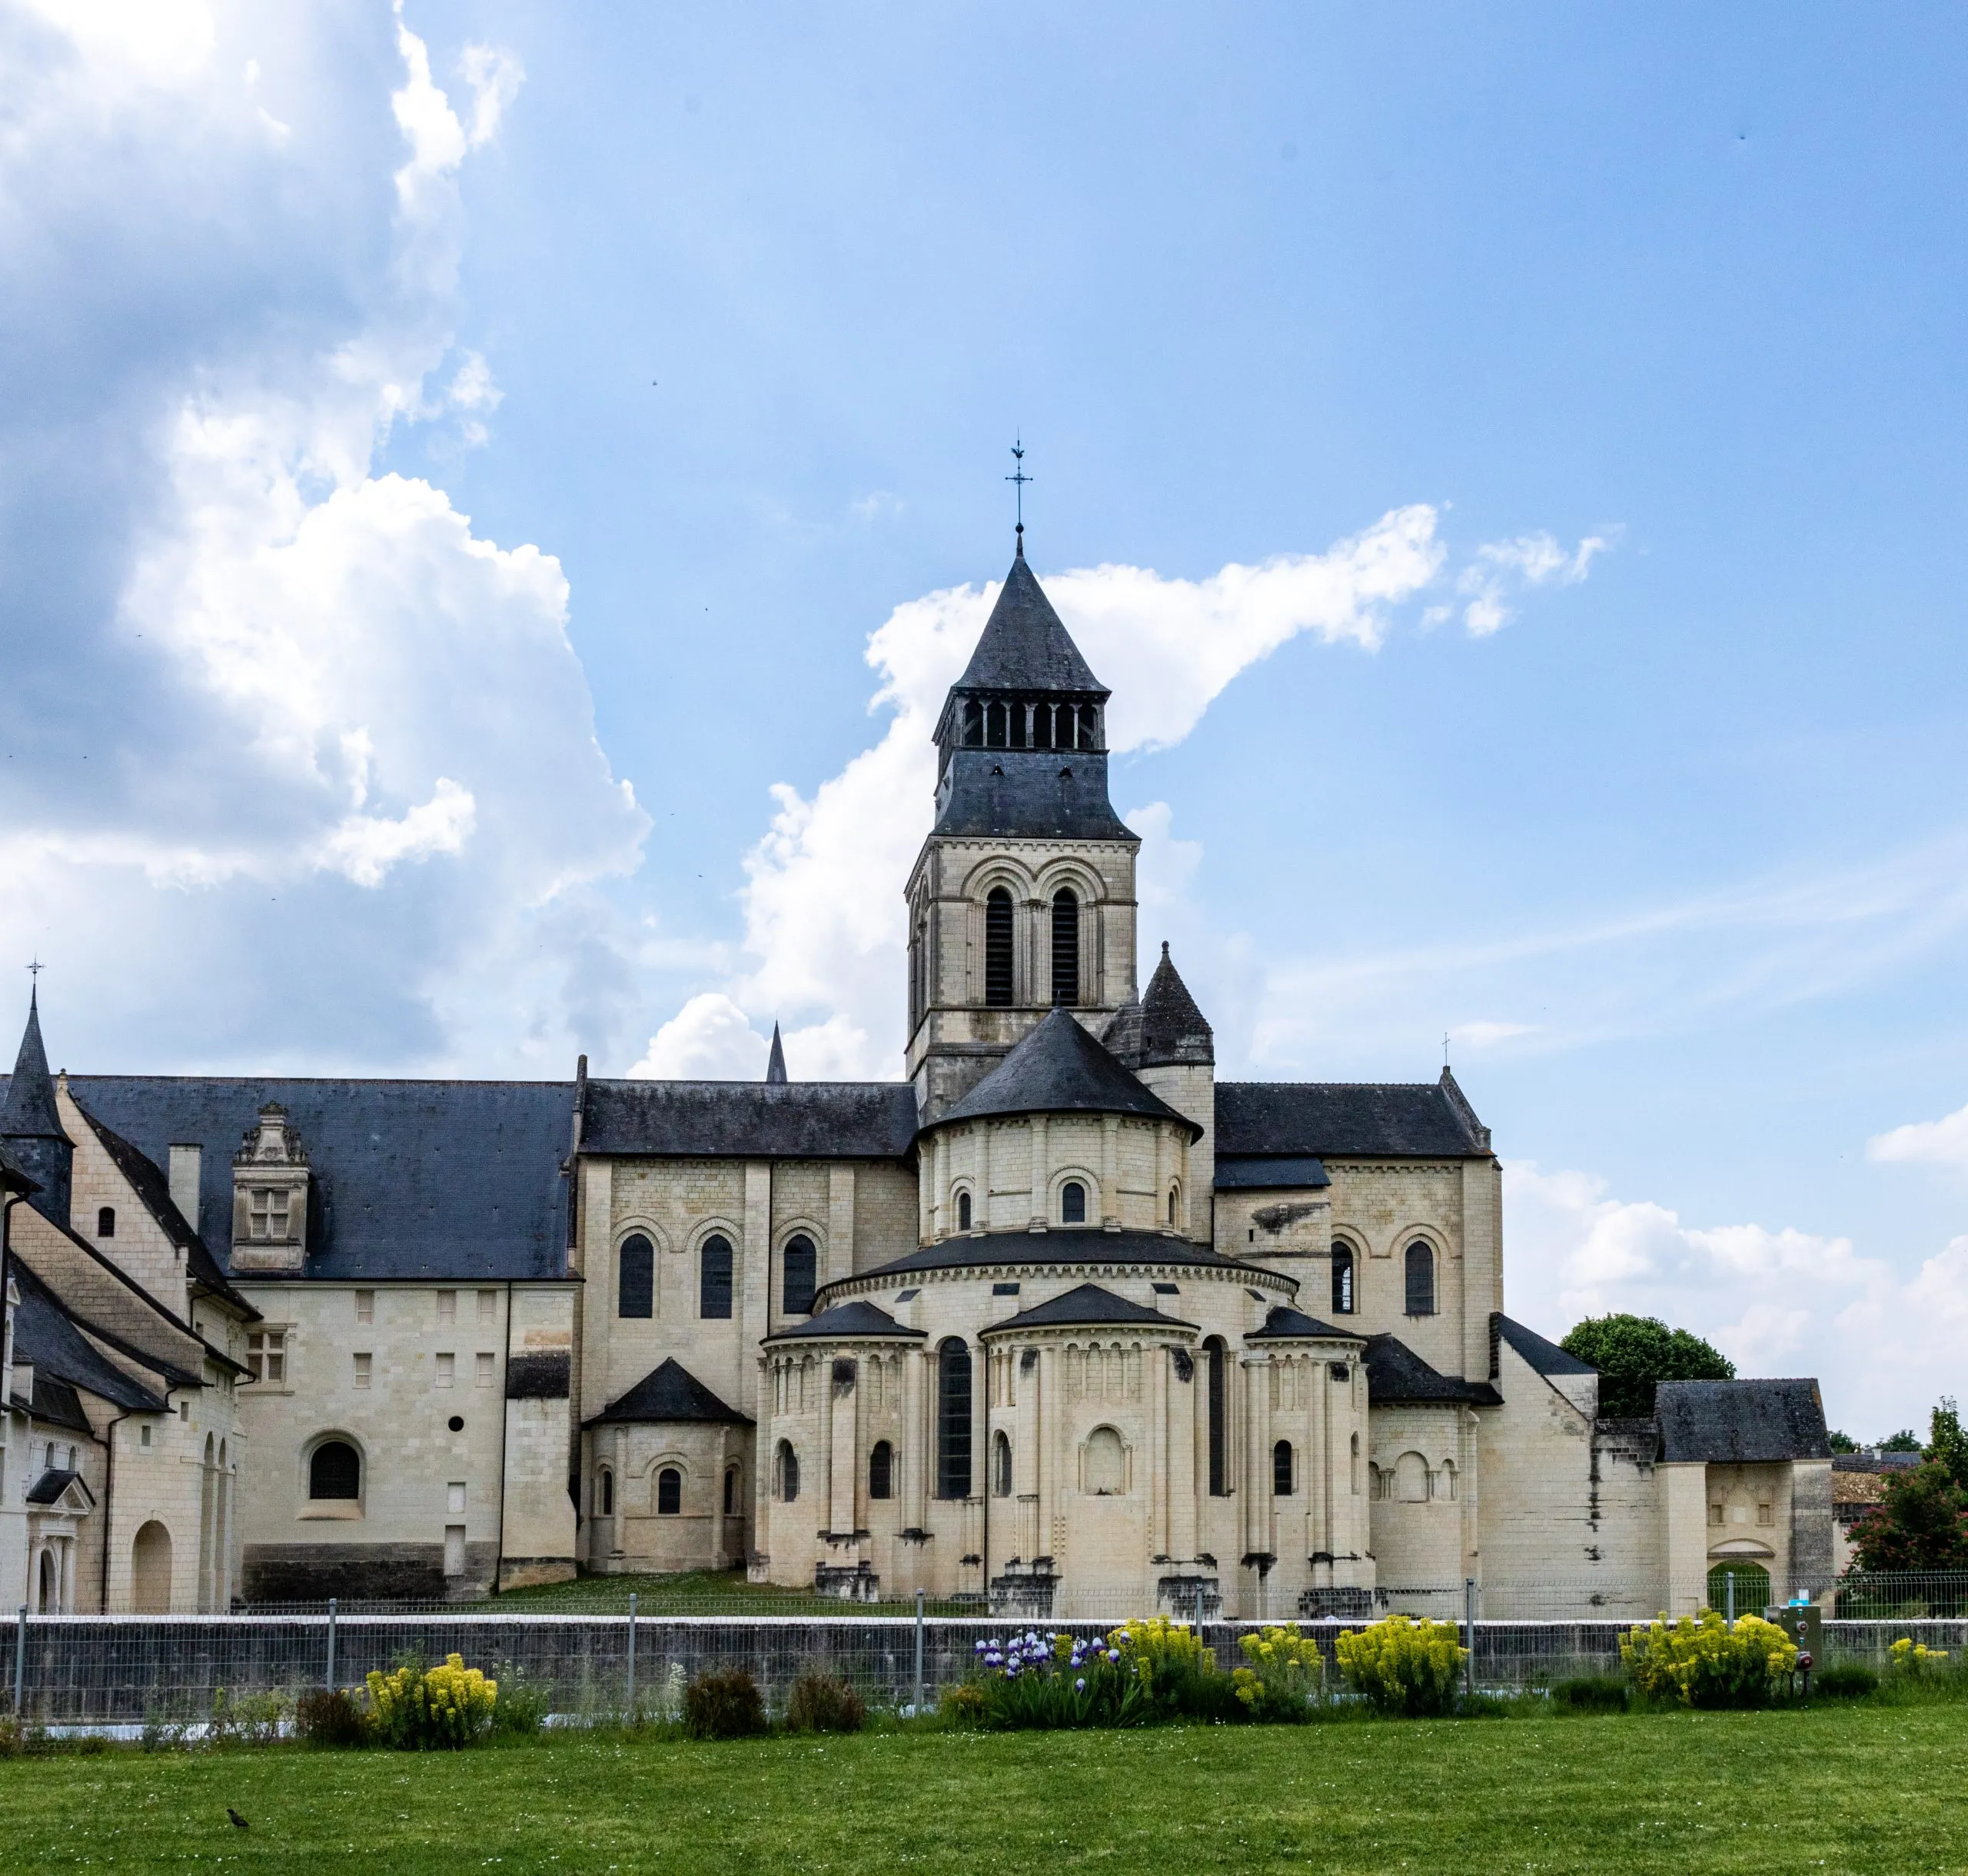 Fontevraud Abbey is the largest Abbey in Europe and is now a UNESCO World Heritage Site